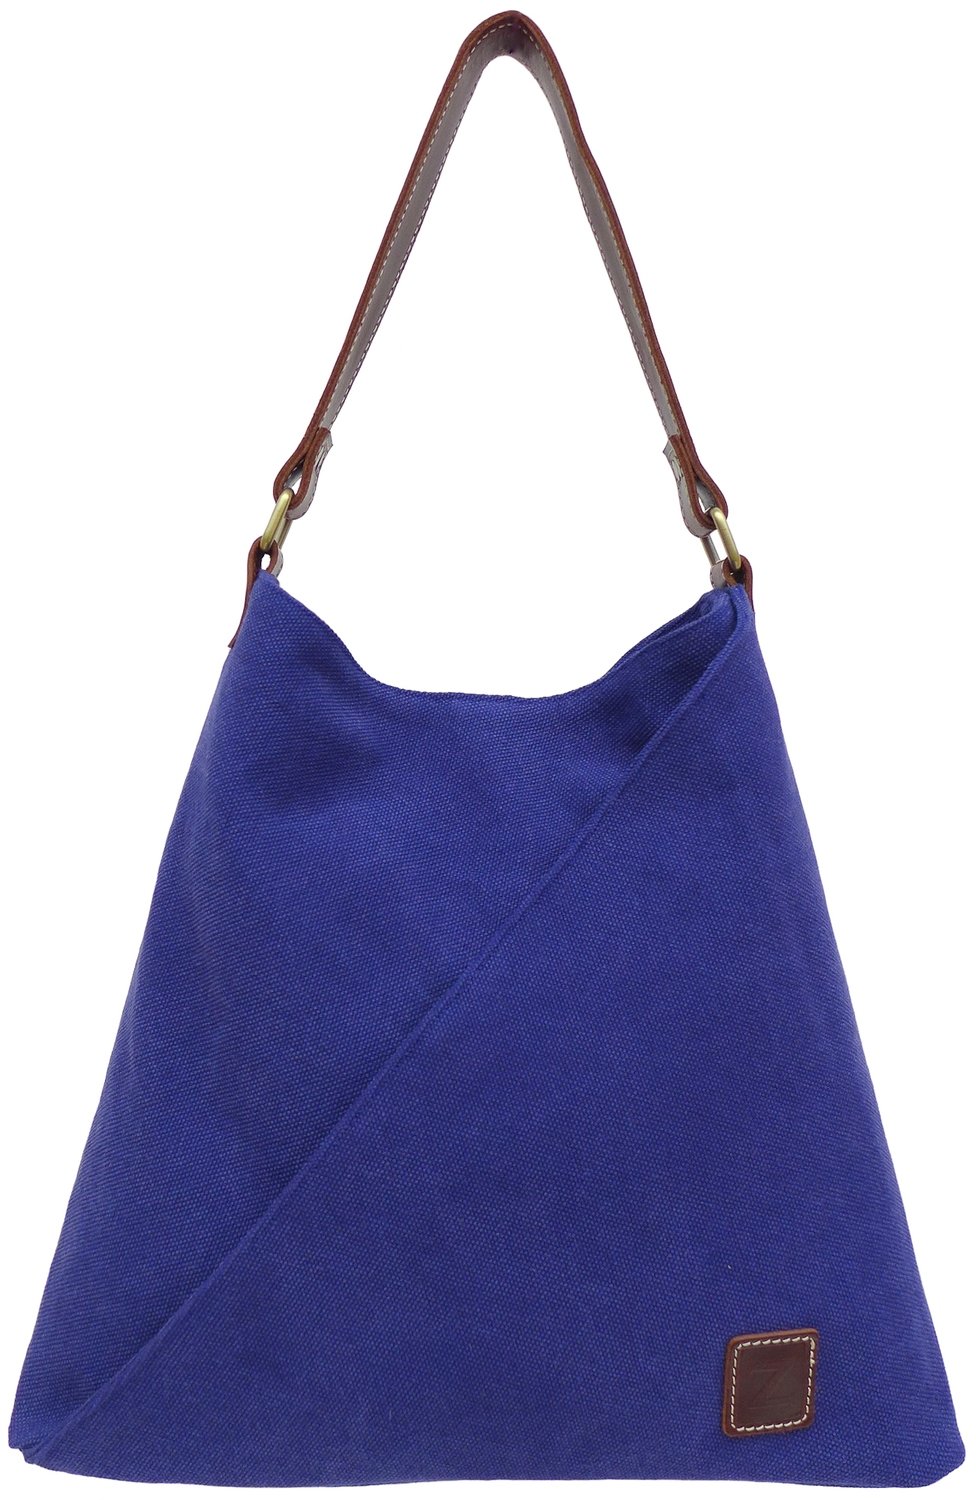 Stone-washed canvas and leather tote bag (blue)